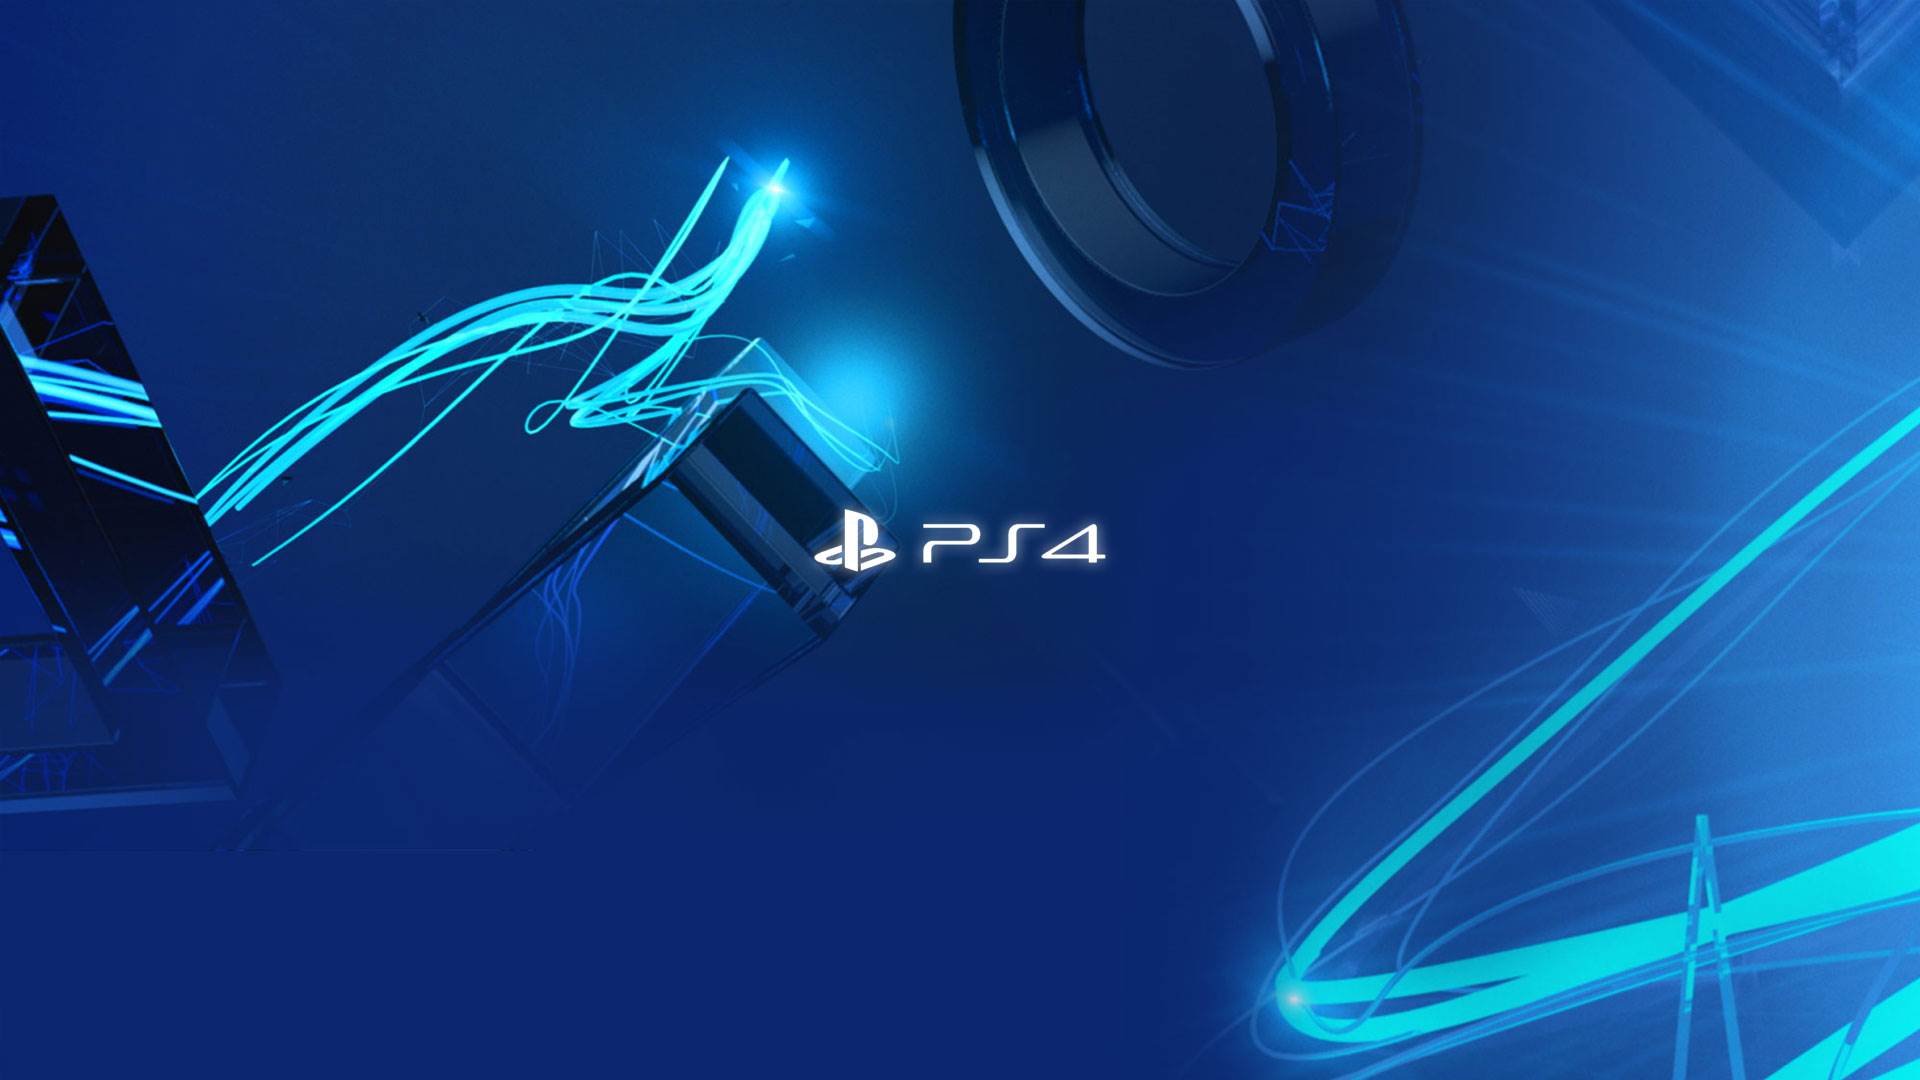 PS4 Wallpapers in 1080P HD GamingBoltcom Video Game News Reviews 1920x1080